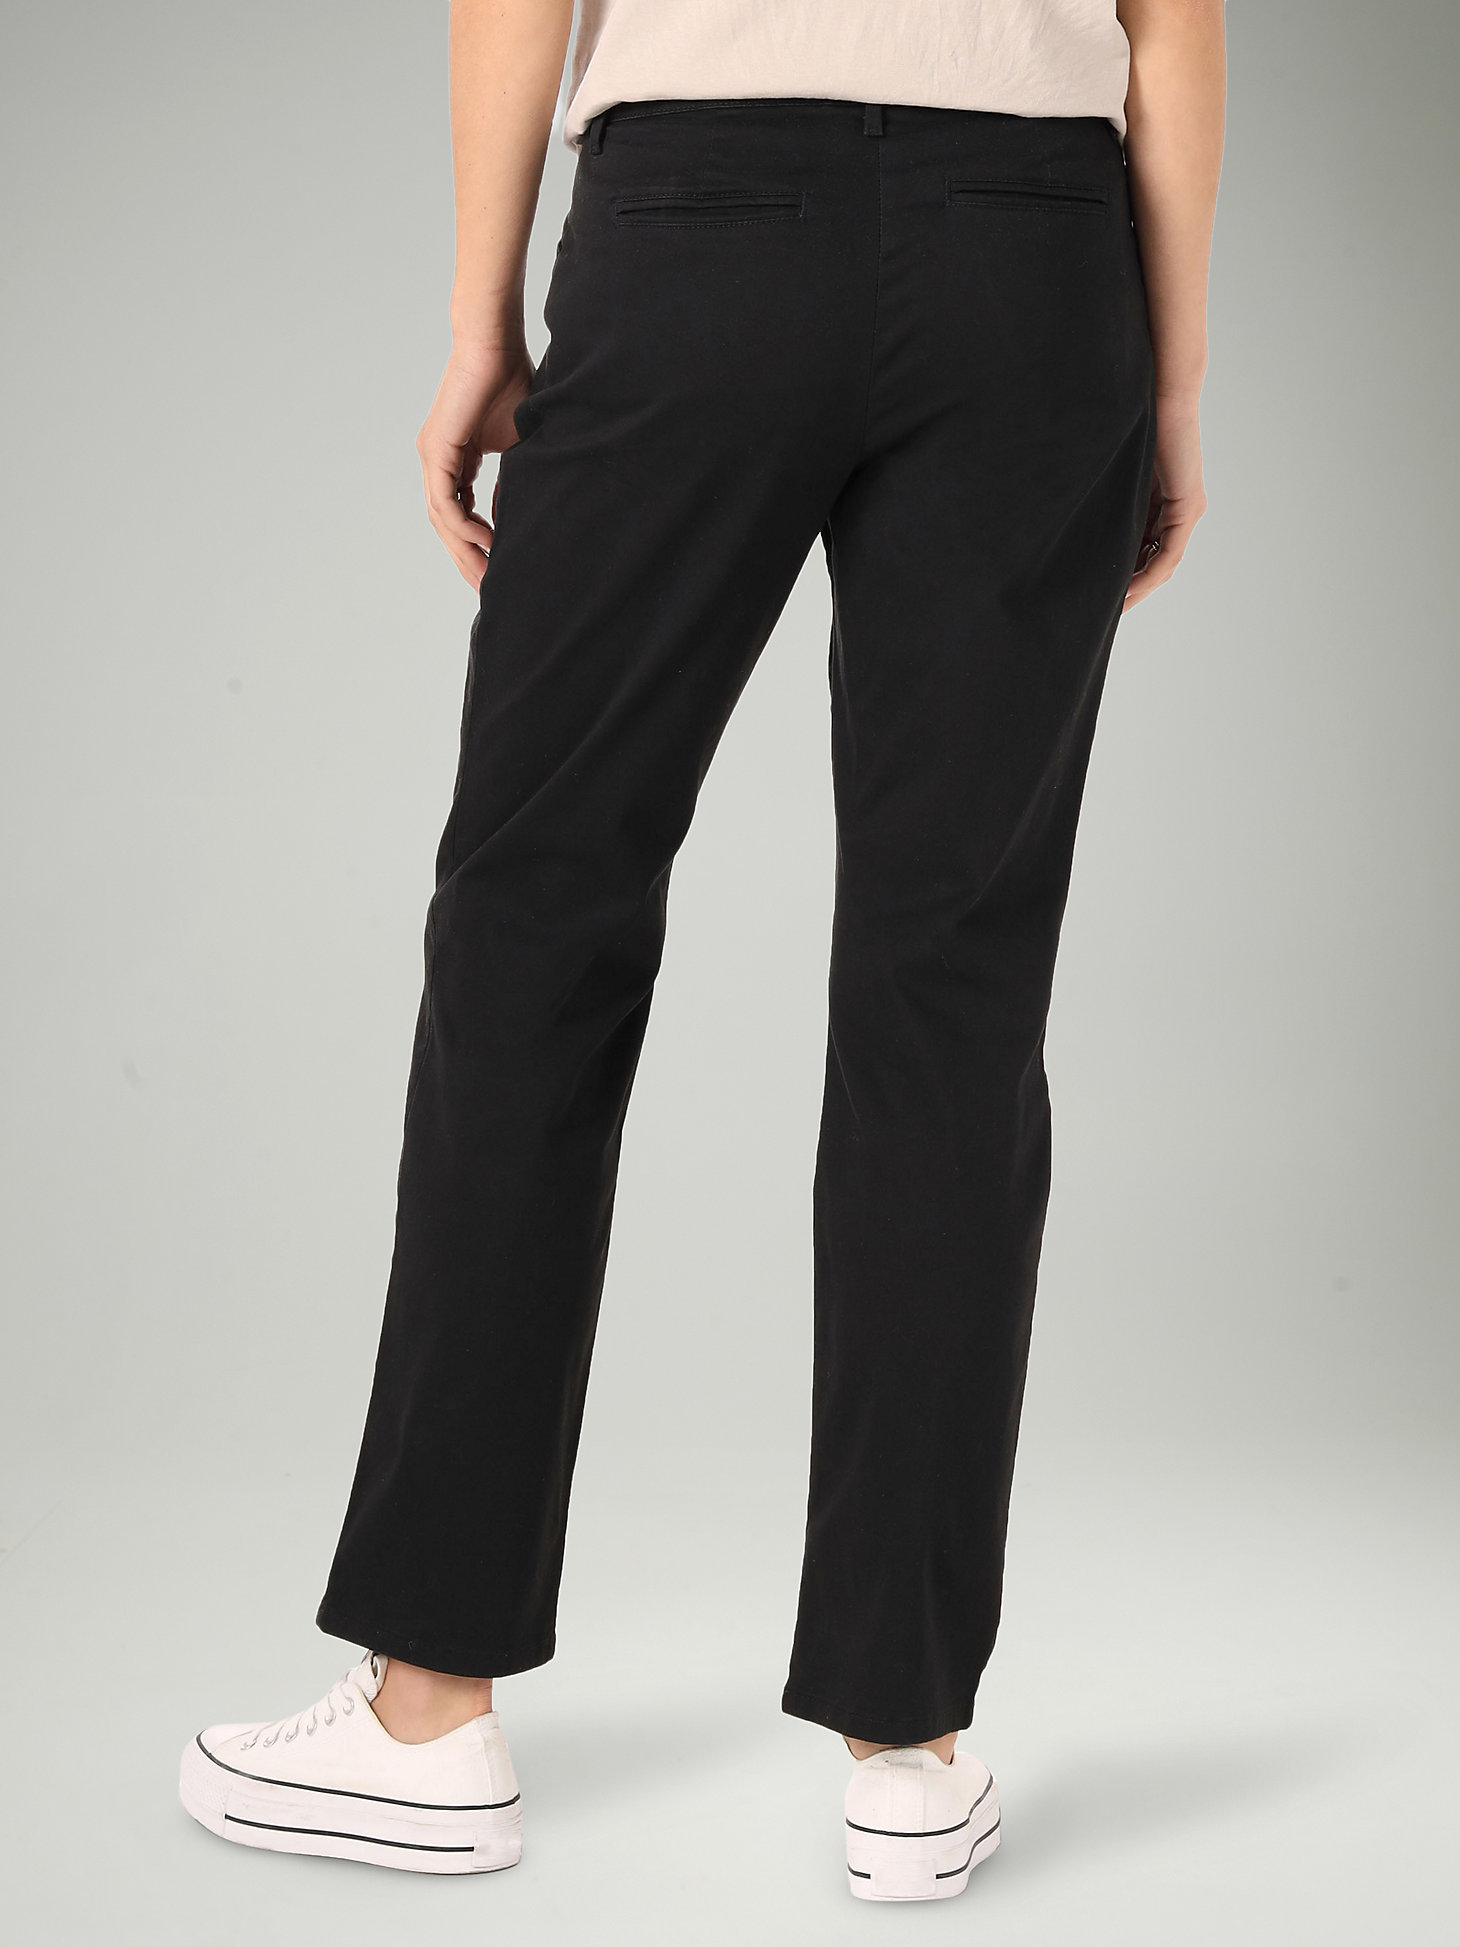 Women’s Relaxed Fit Straight Leg Pant (All Day Pant) in Black alternative view 1